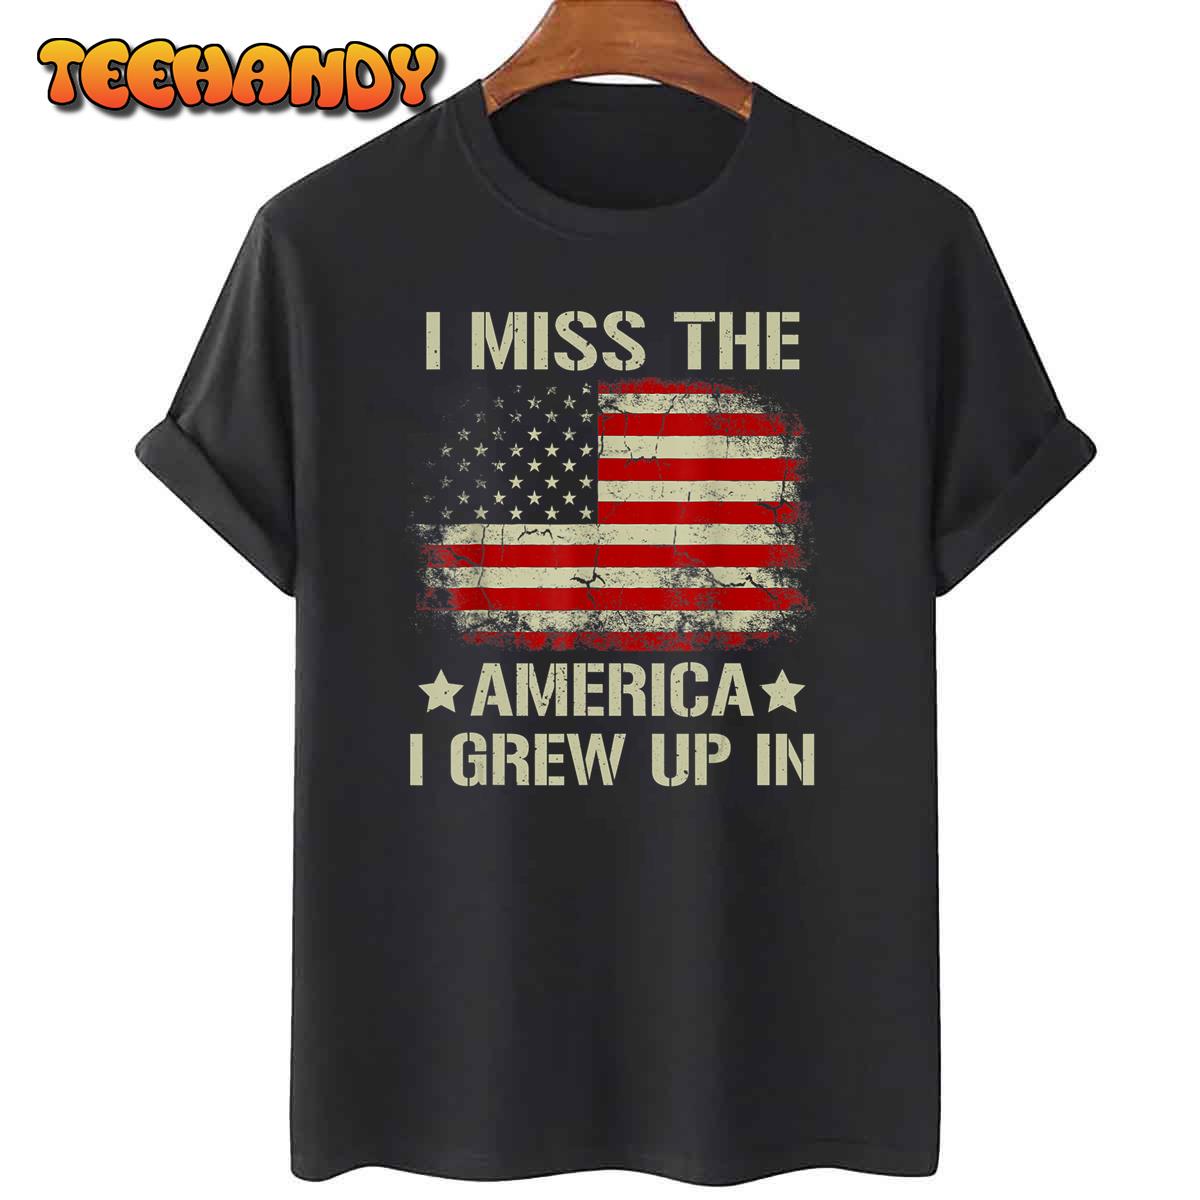 I Miss The America I Grew Up In American Flag Vintage T-Shirt